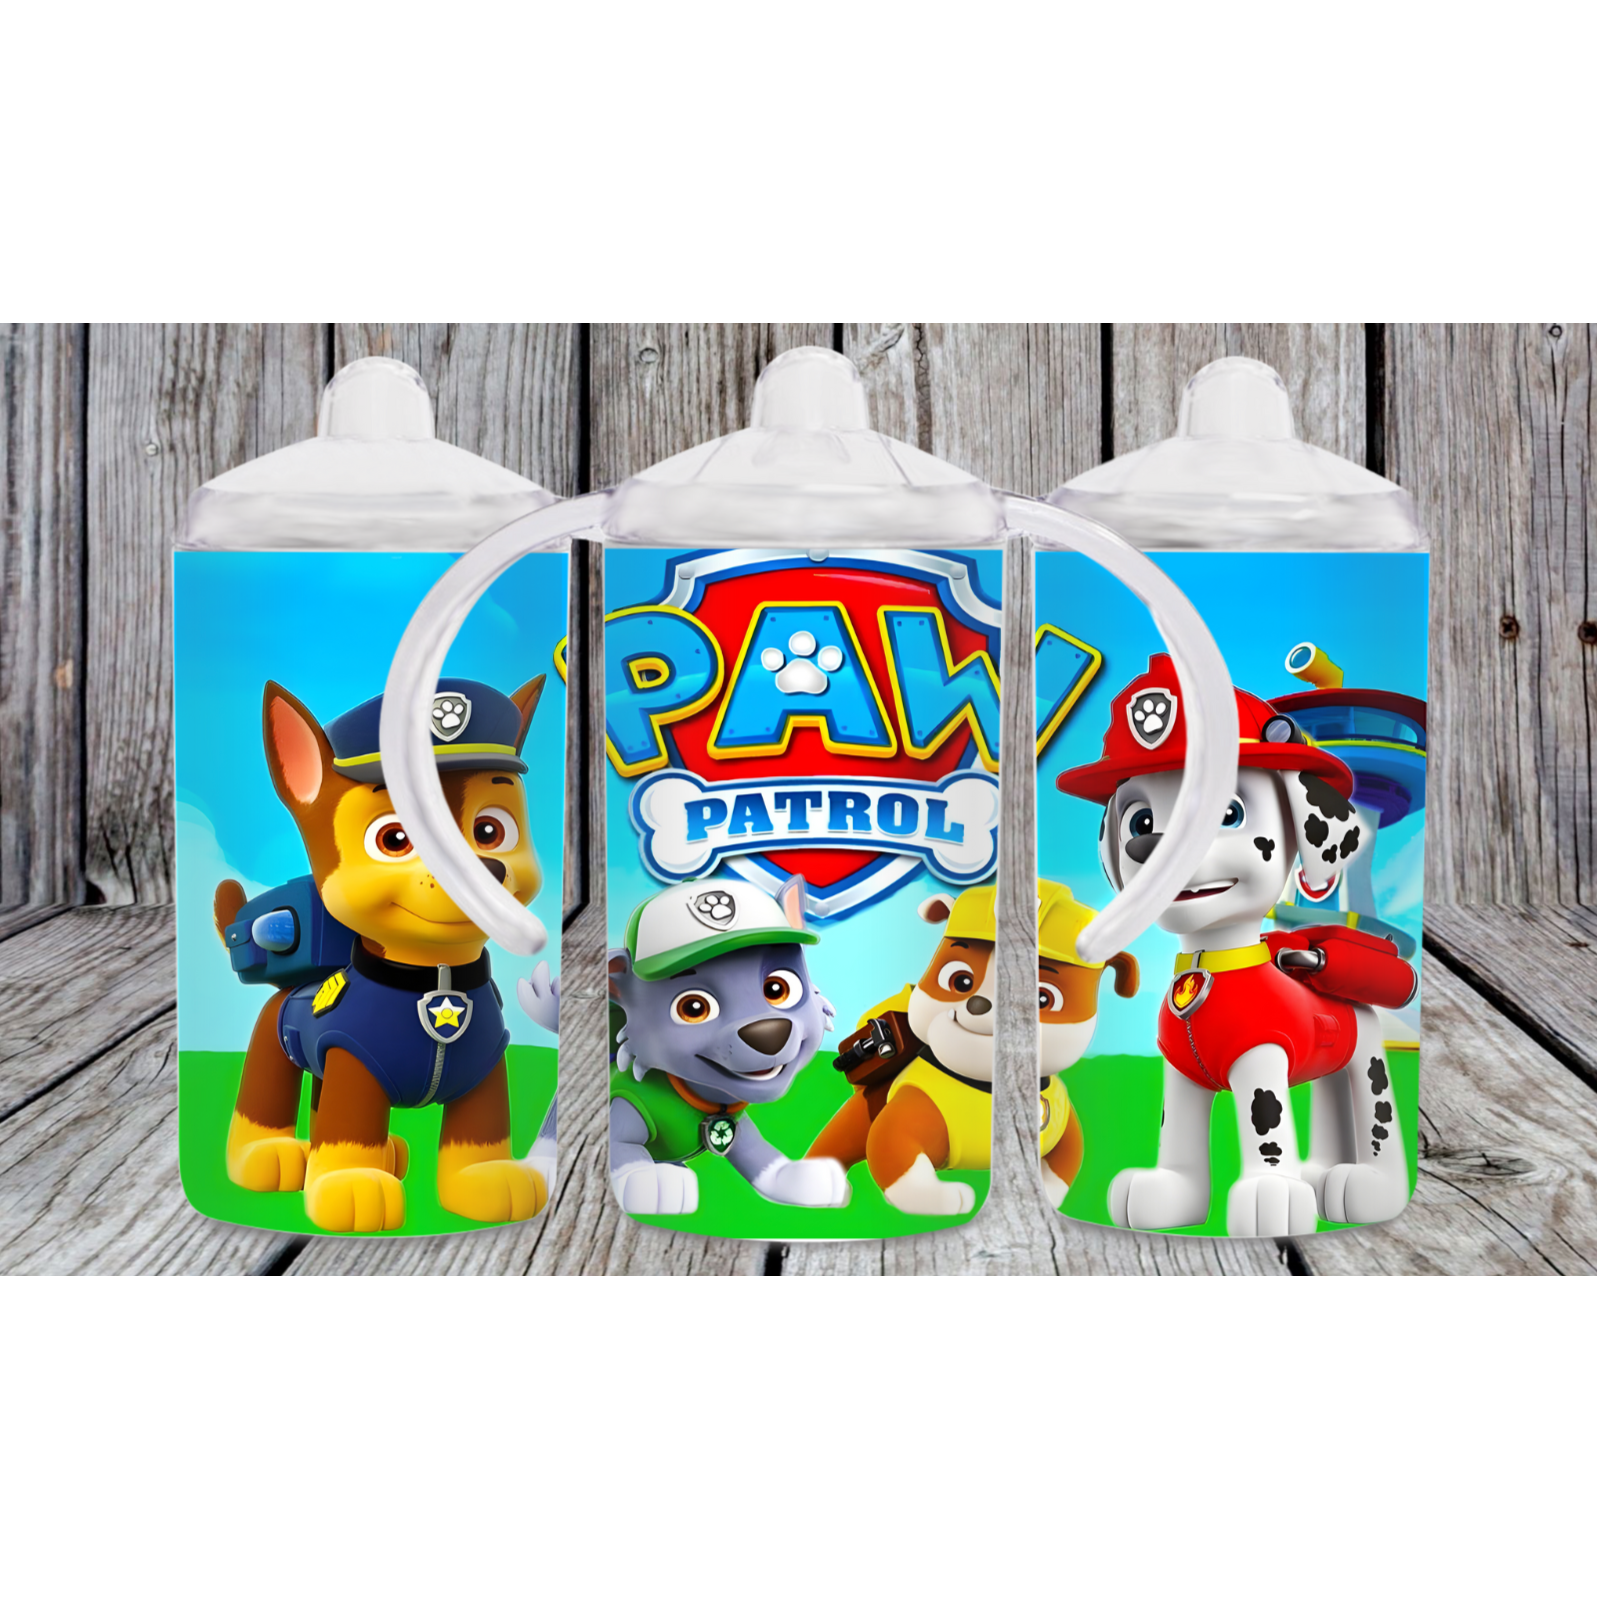 Paw Patrol 12oz toddler sippy cup with 2 lids